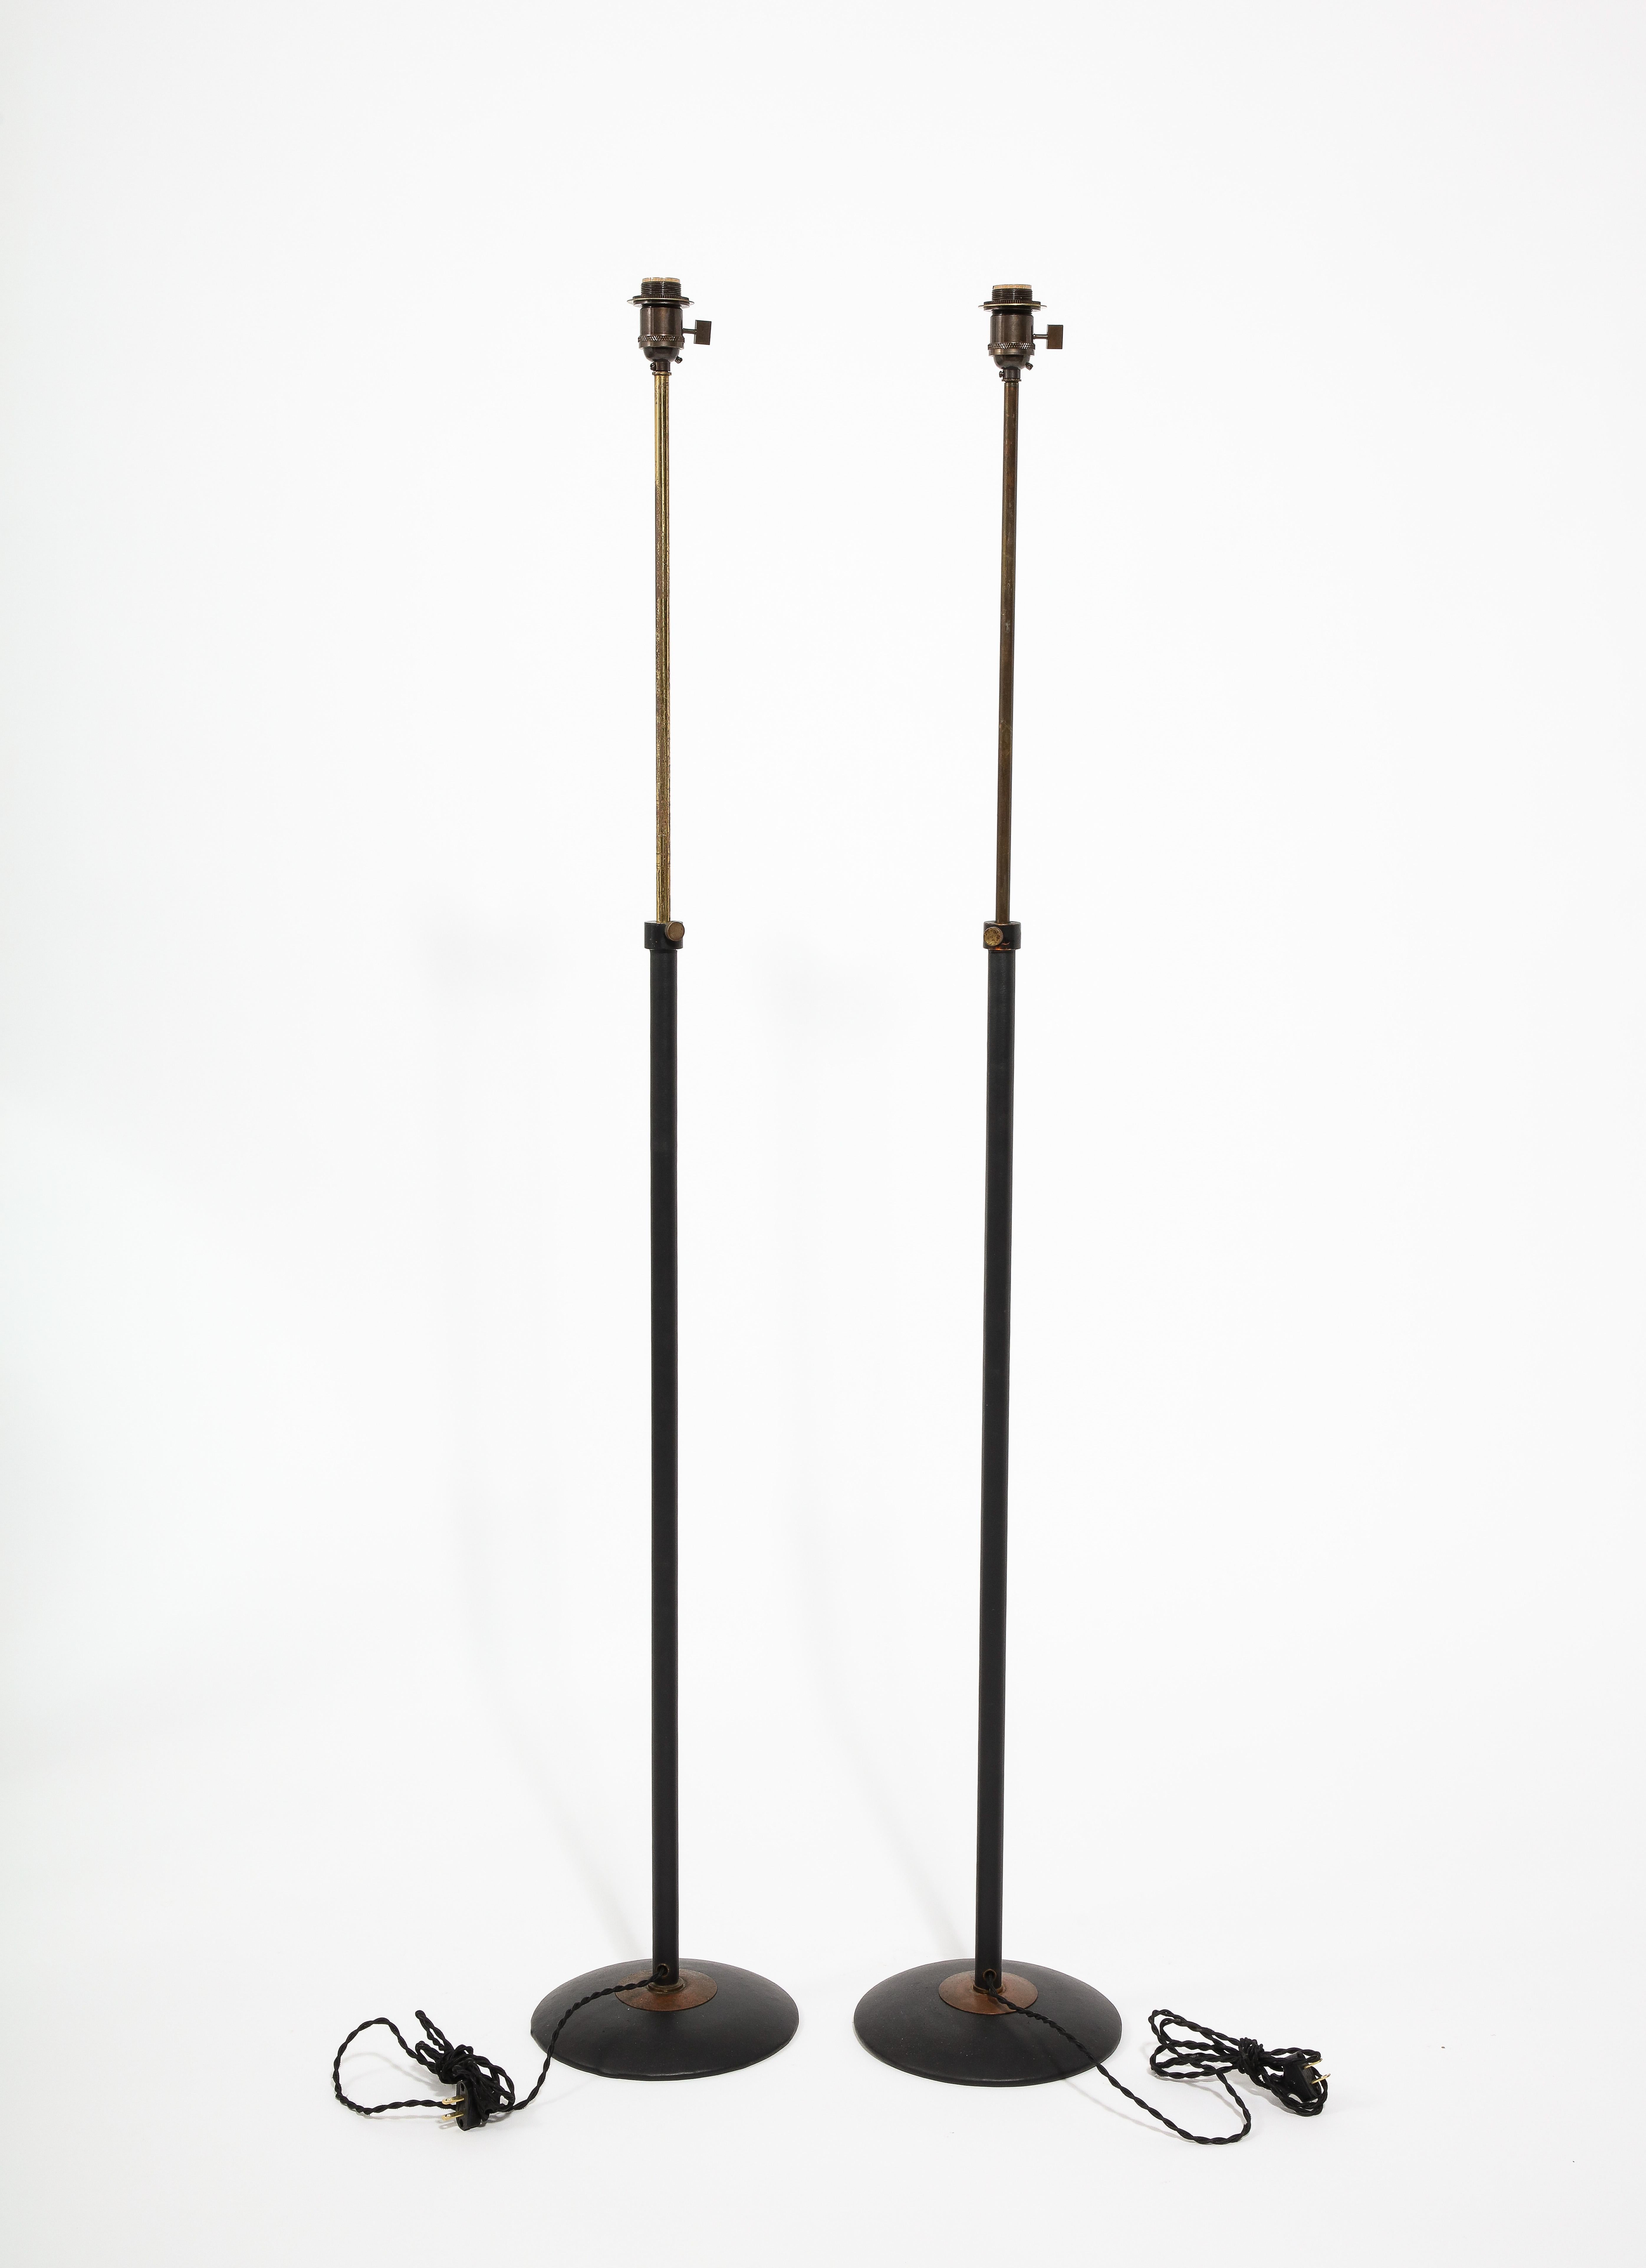 Adnet Style Brass & Black Leather Wrapped Adjustable Floor Lamps, France 1960's For Sale 2